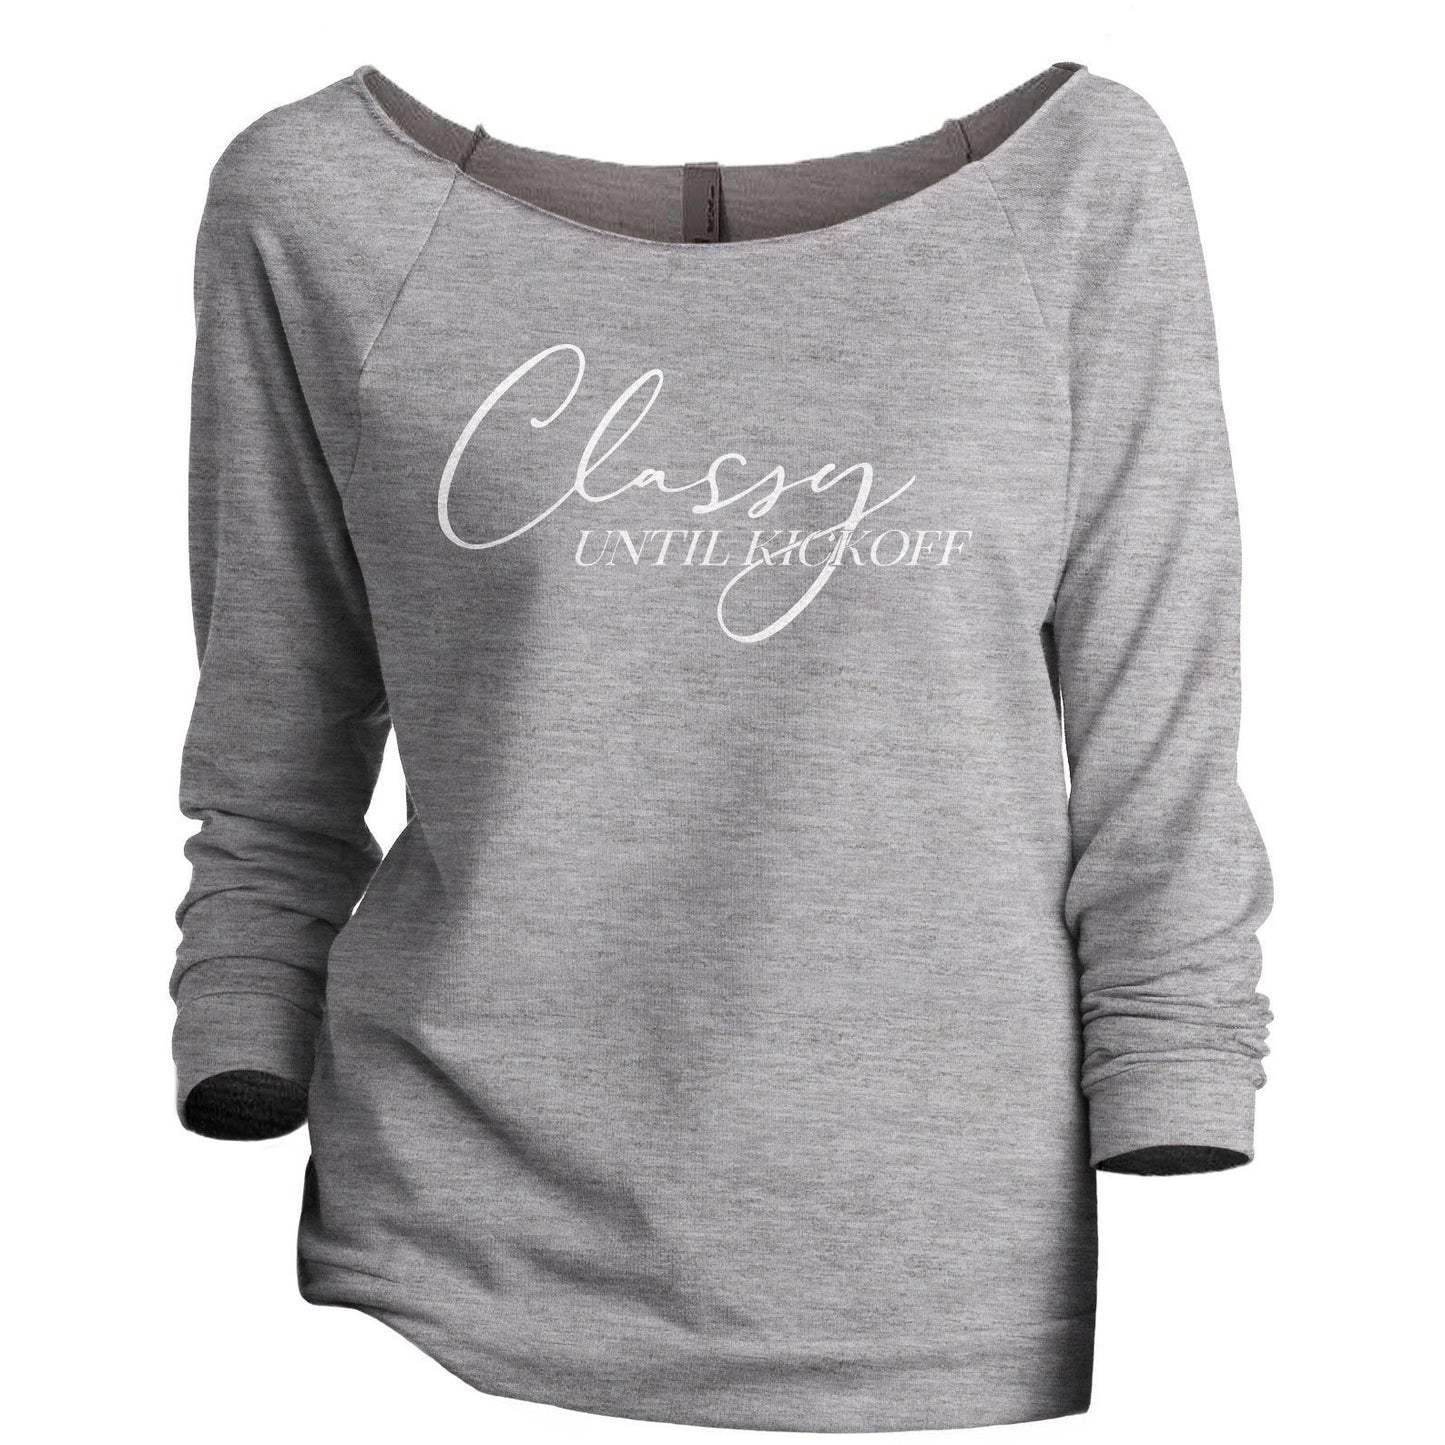 Classy Until Kickoff Women's Graphic Printed Slouchy 3/4 Sleeves ...